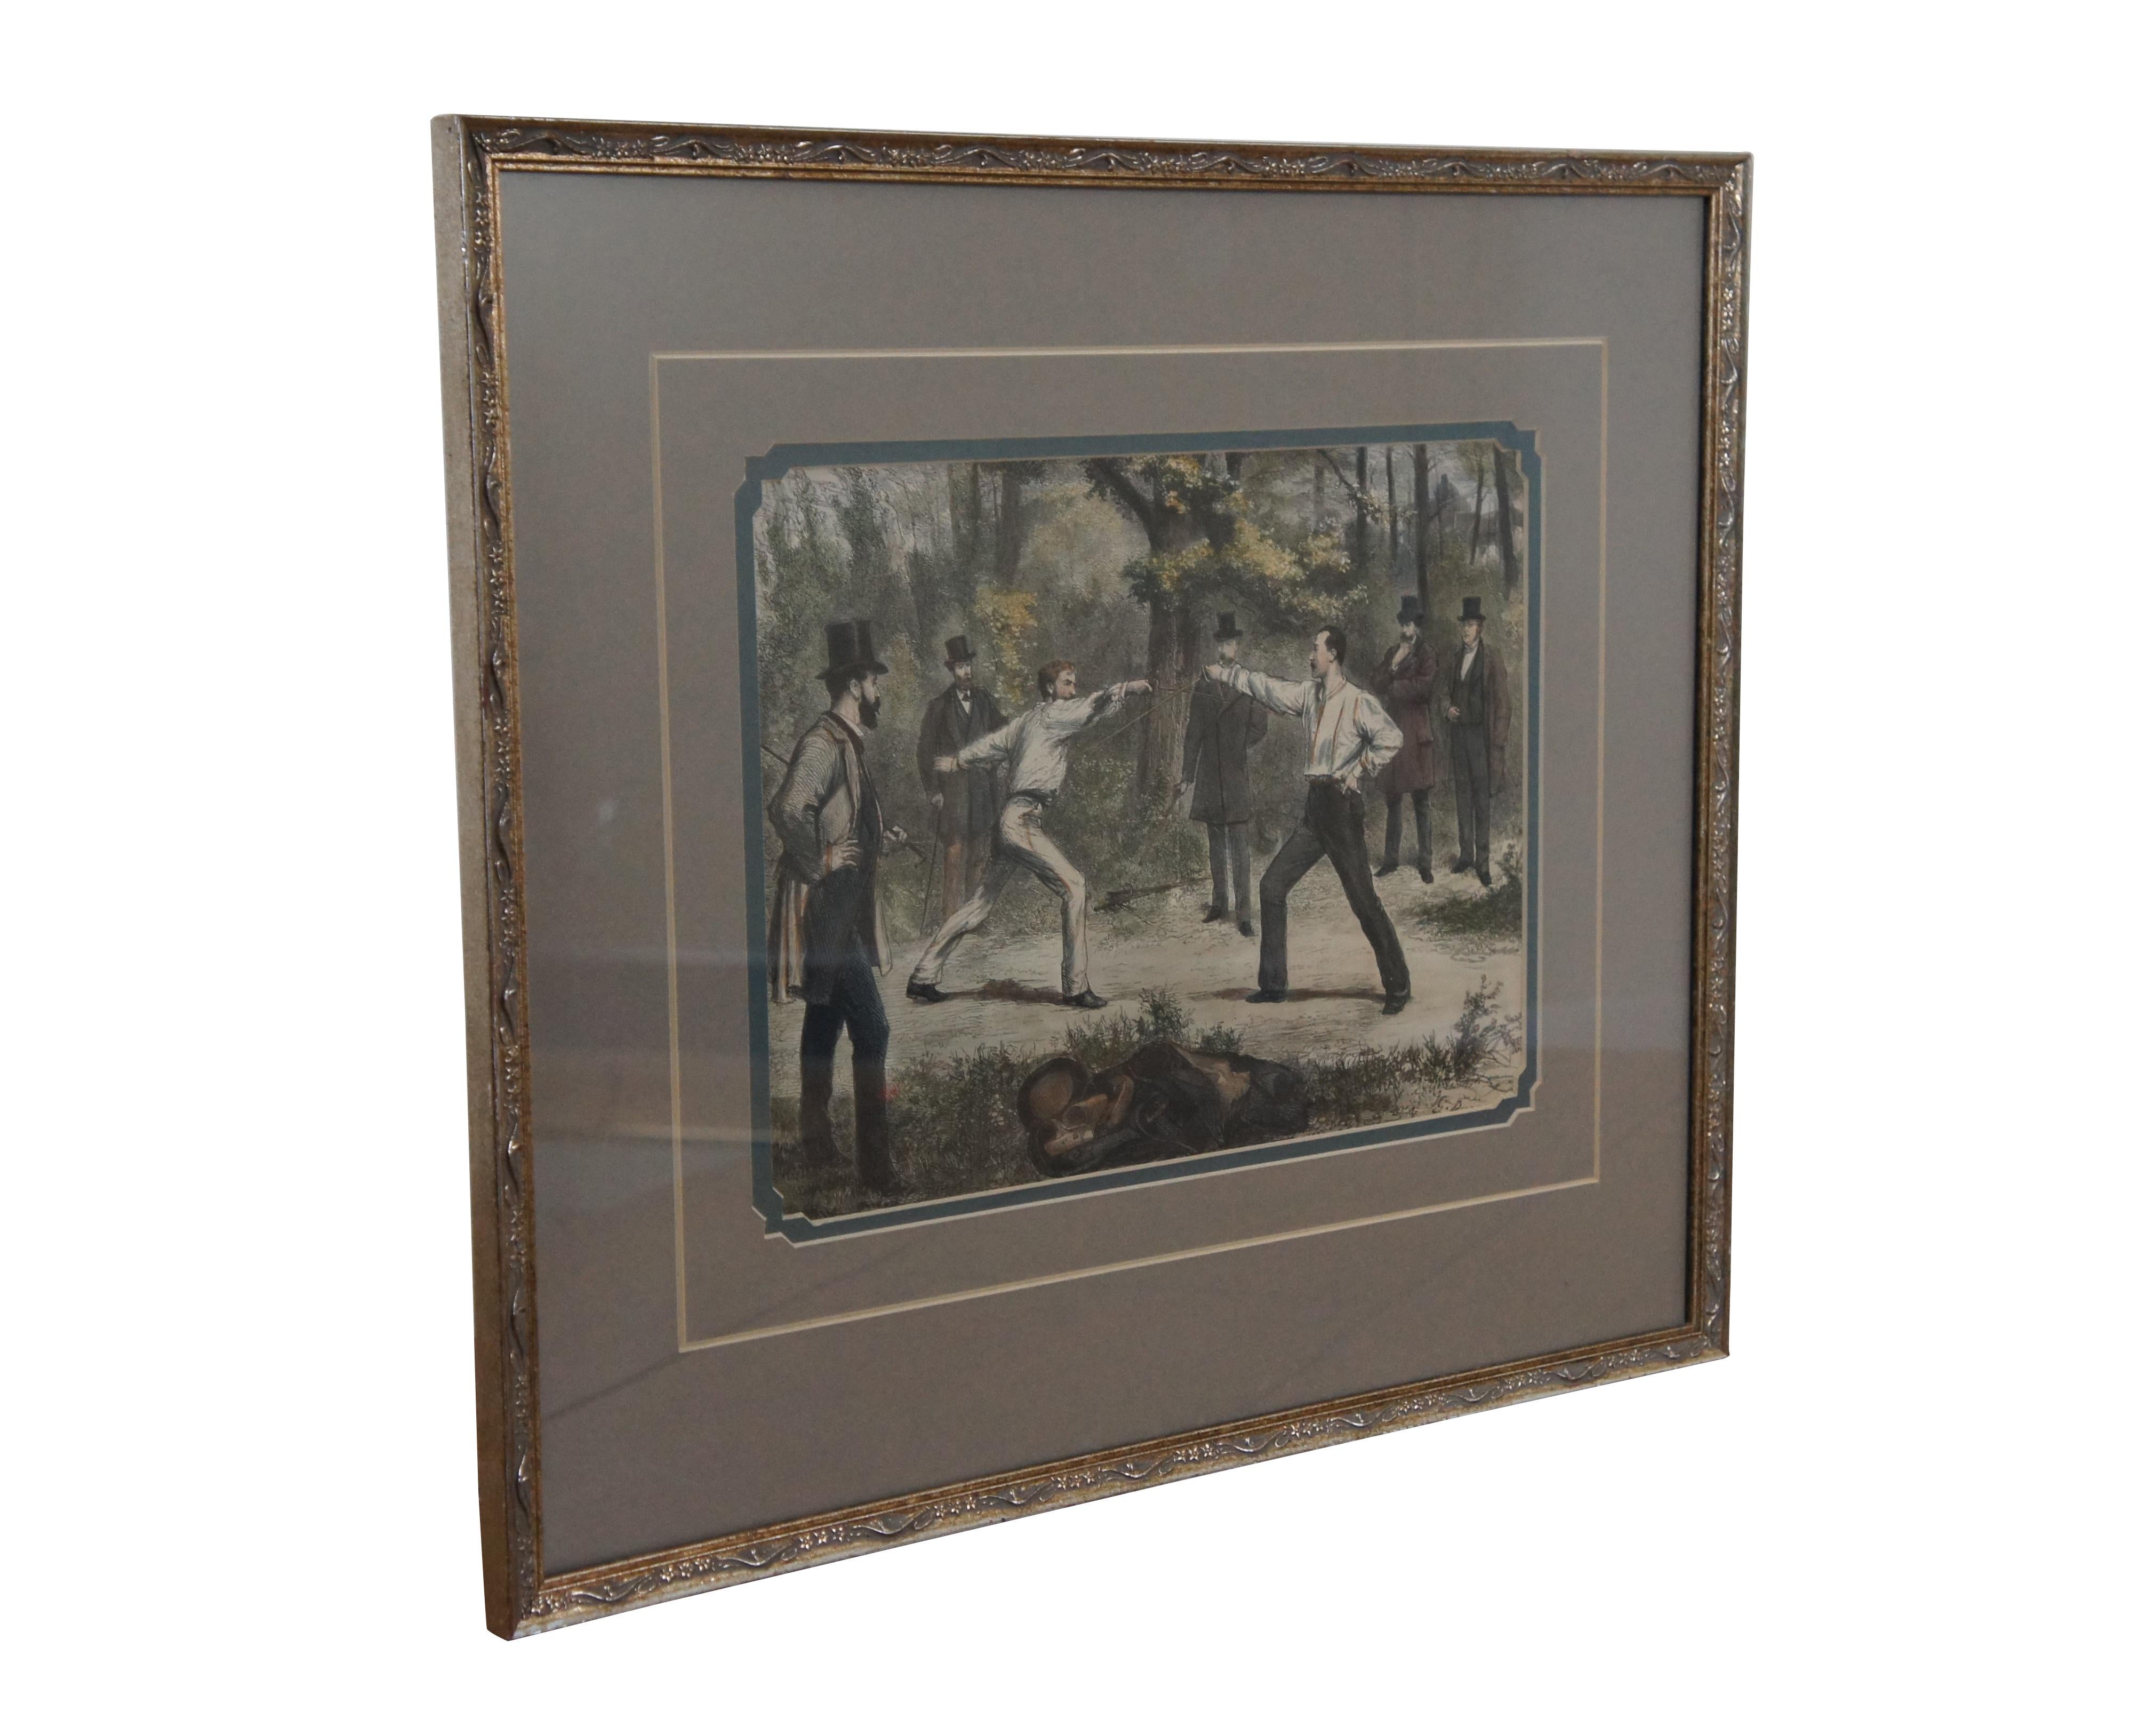 Victorian 1870s Parisian Duels An Encounter in the Bois Boulogne Hand Colored Engraving